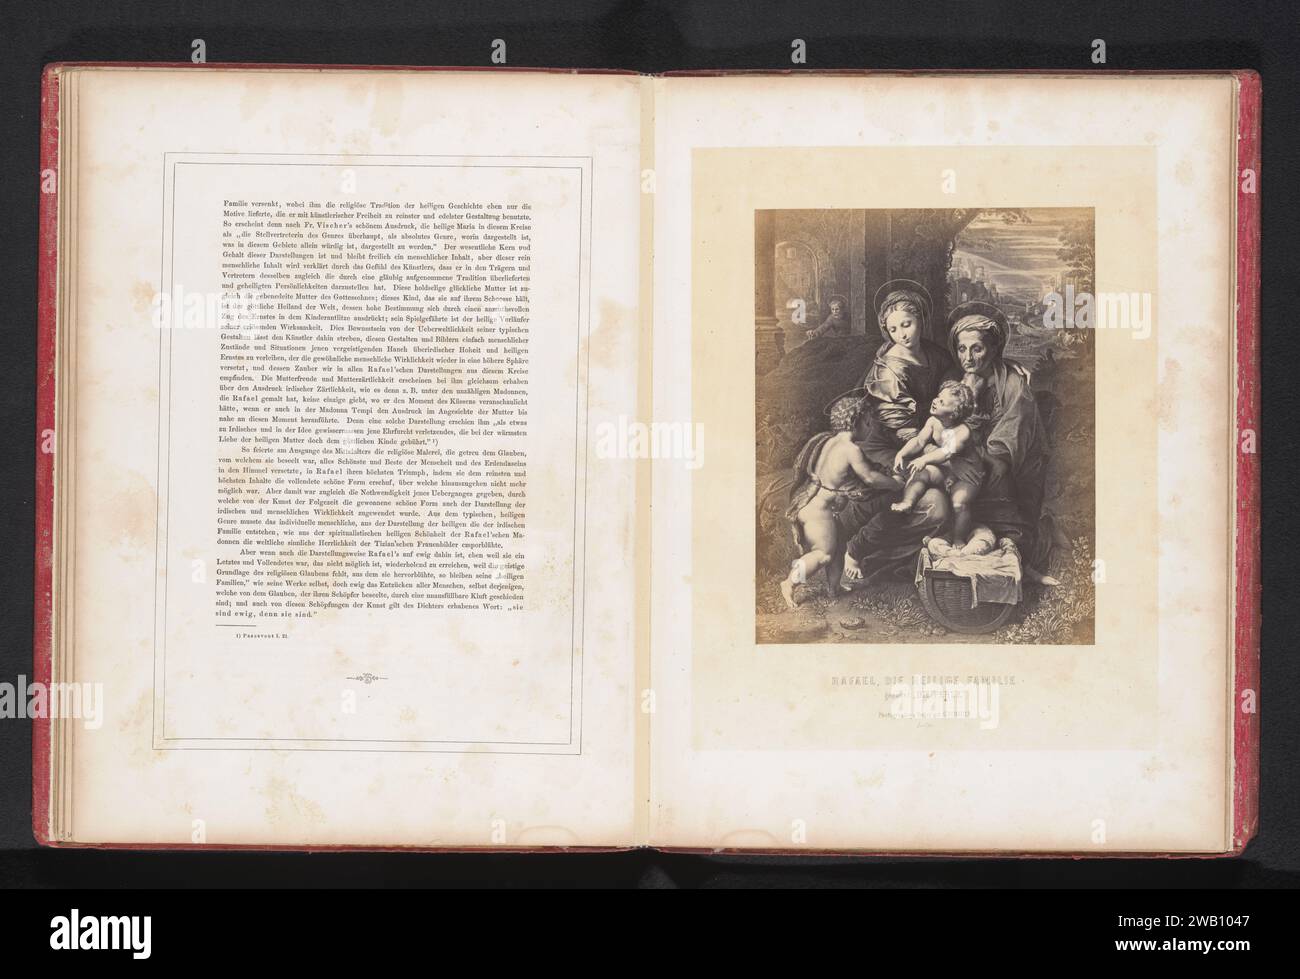 Photo production from a print to La Perla through Rafaël, Gustav Schauer, After Anonymous, After Rafaël, c. 1851 - In or Before 1861 photograph  Berlin photographic support albumen print Holy Family, and derived representations Stock Photo